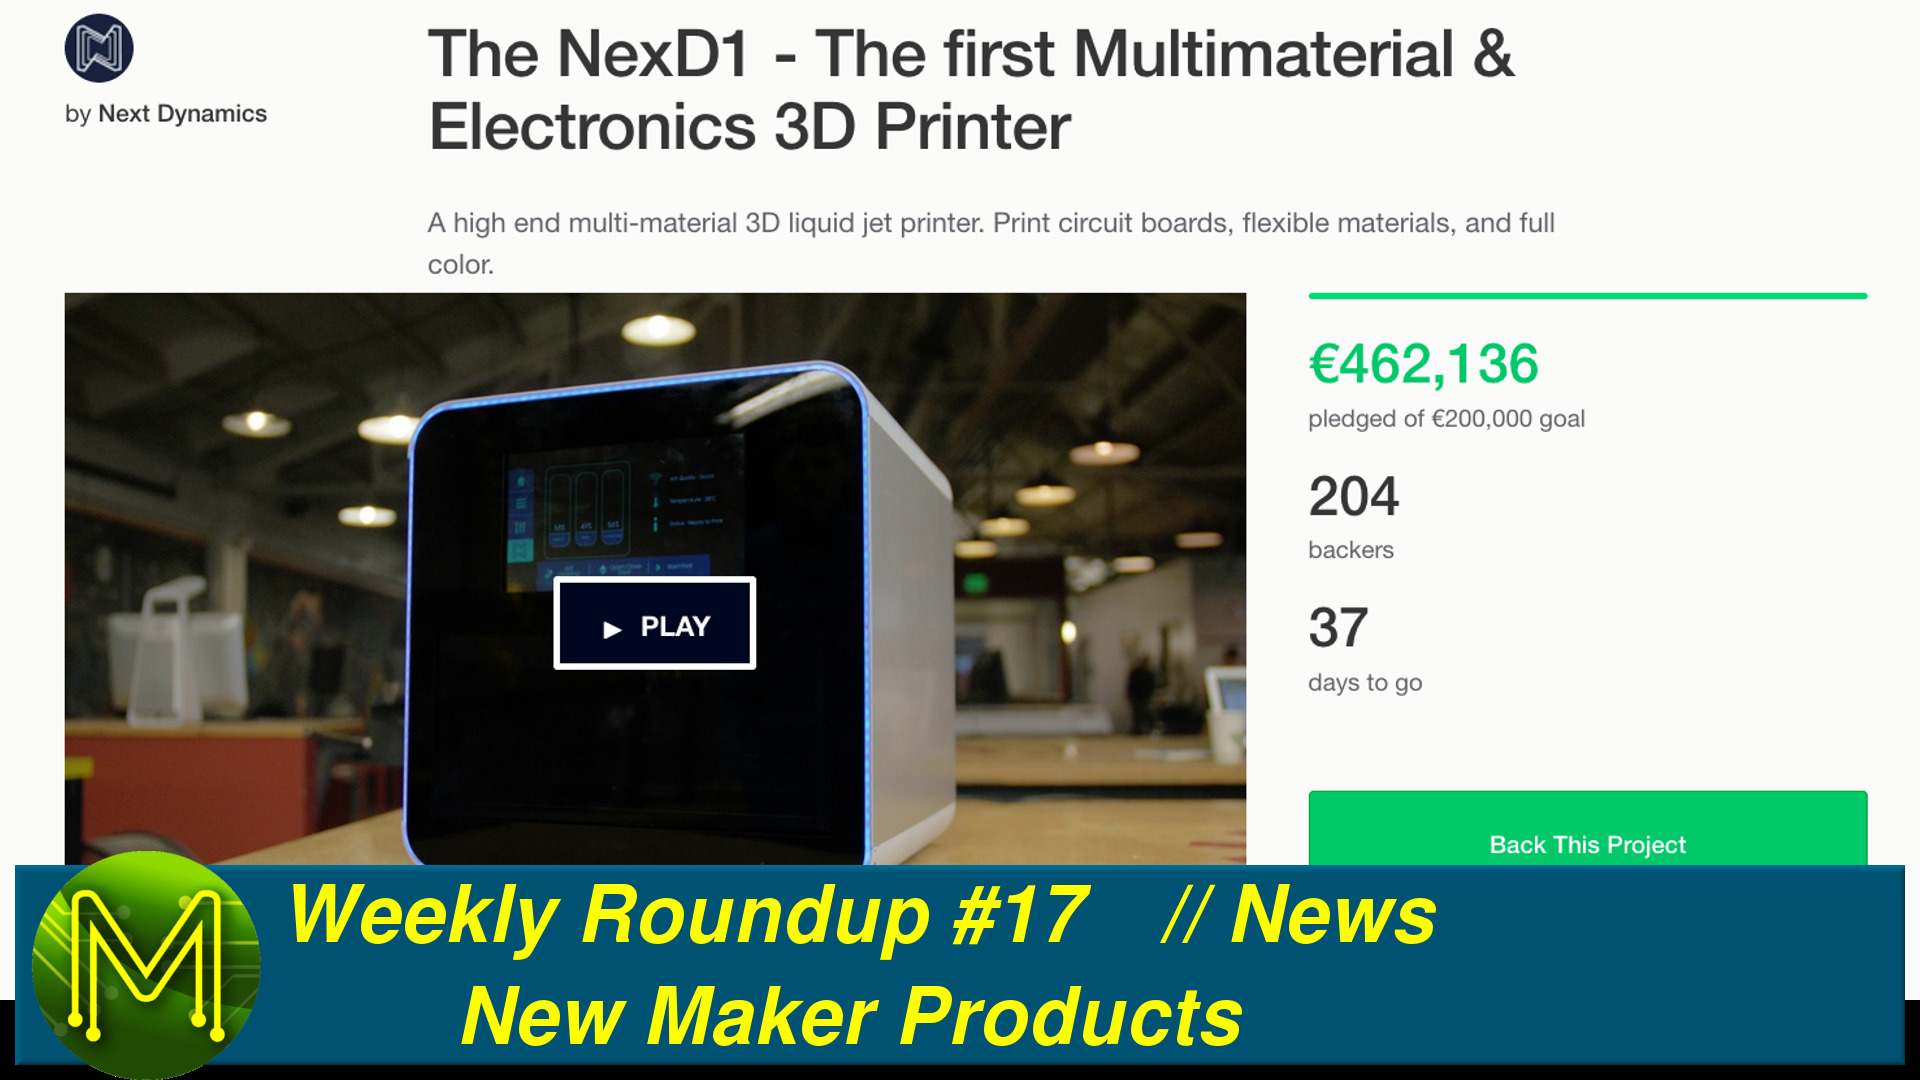 Weekly Roundup #17 - New Maker Products // News